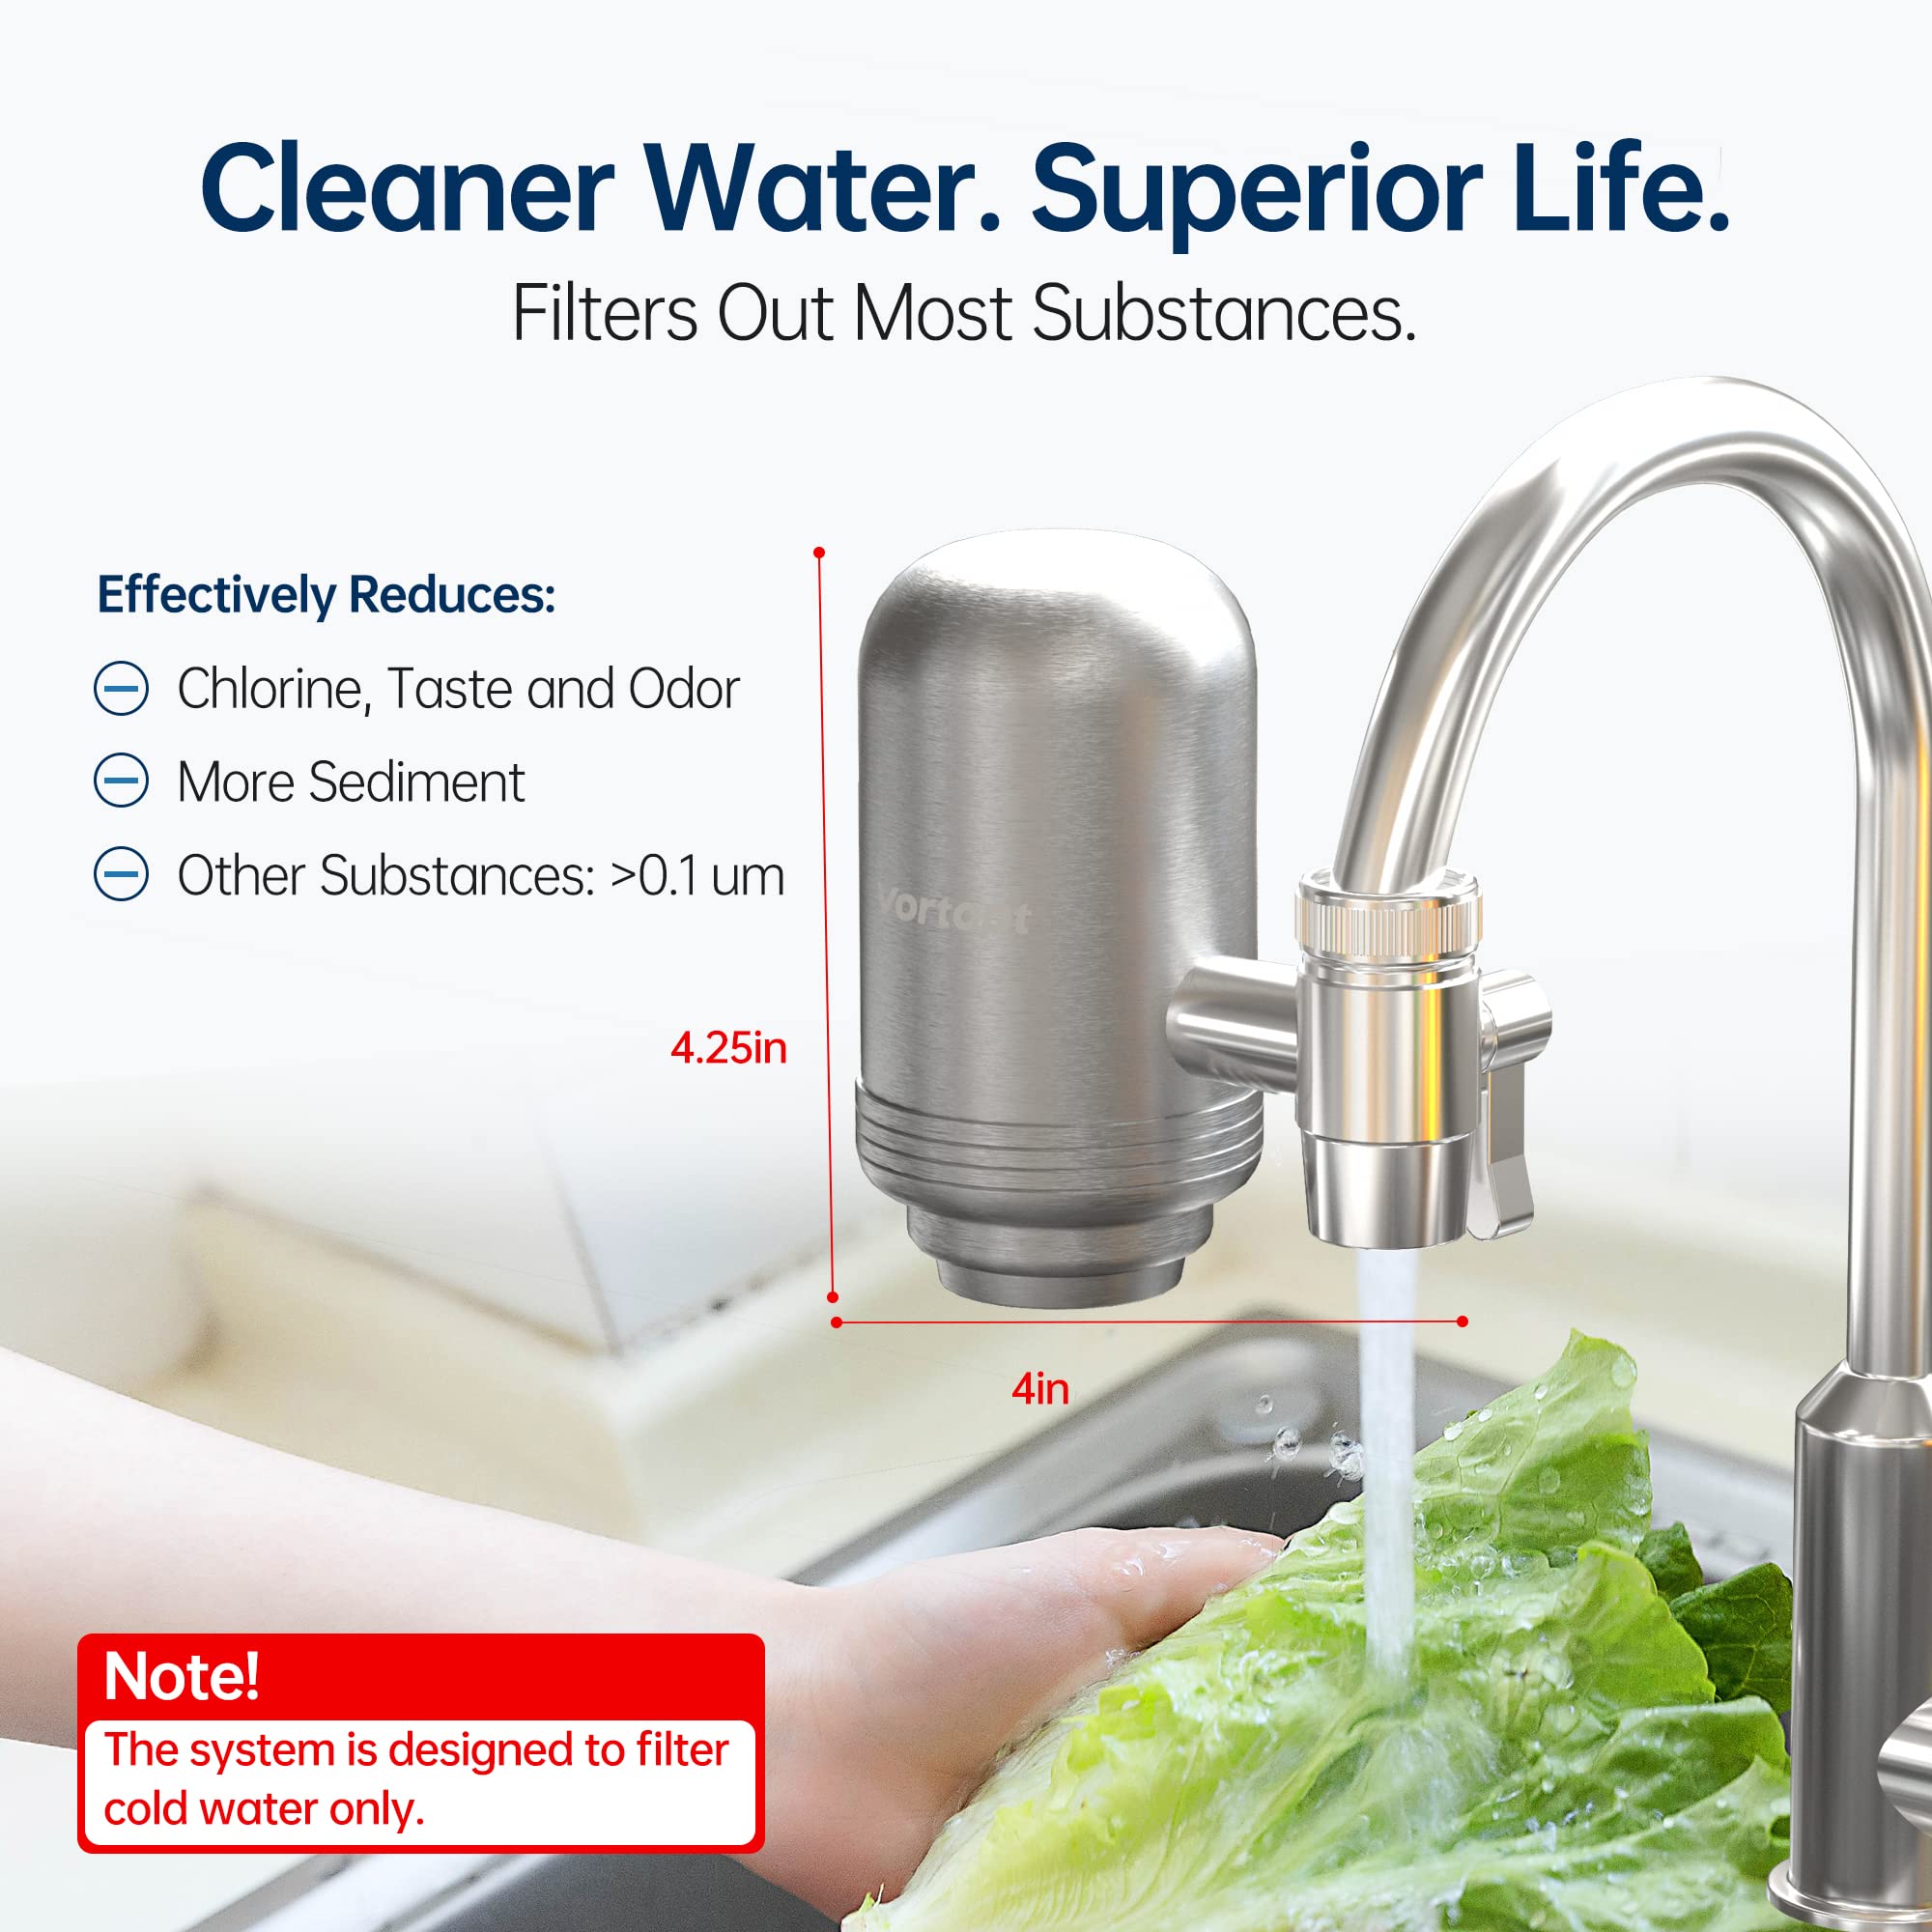 T2 500G Stainless Steel Faucet Water Filter for Sink, Vortopt